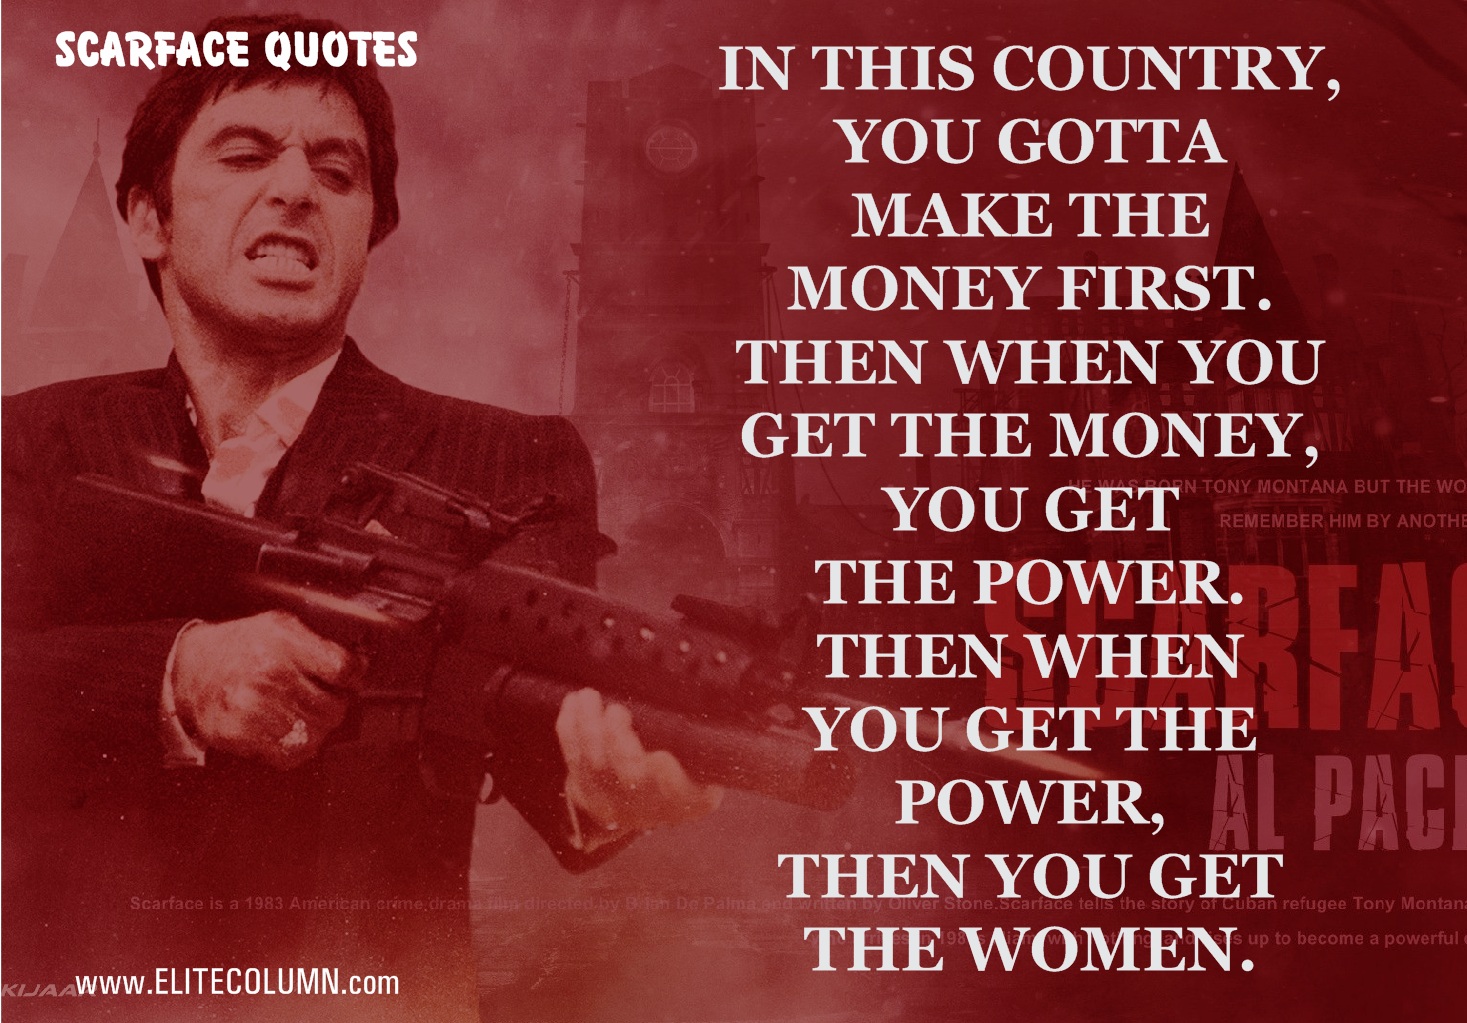 Badass scarface quotes